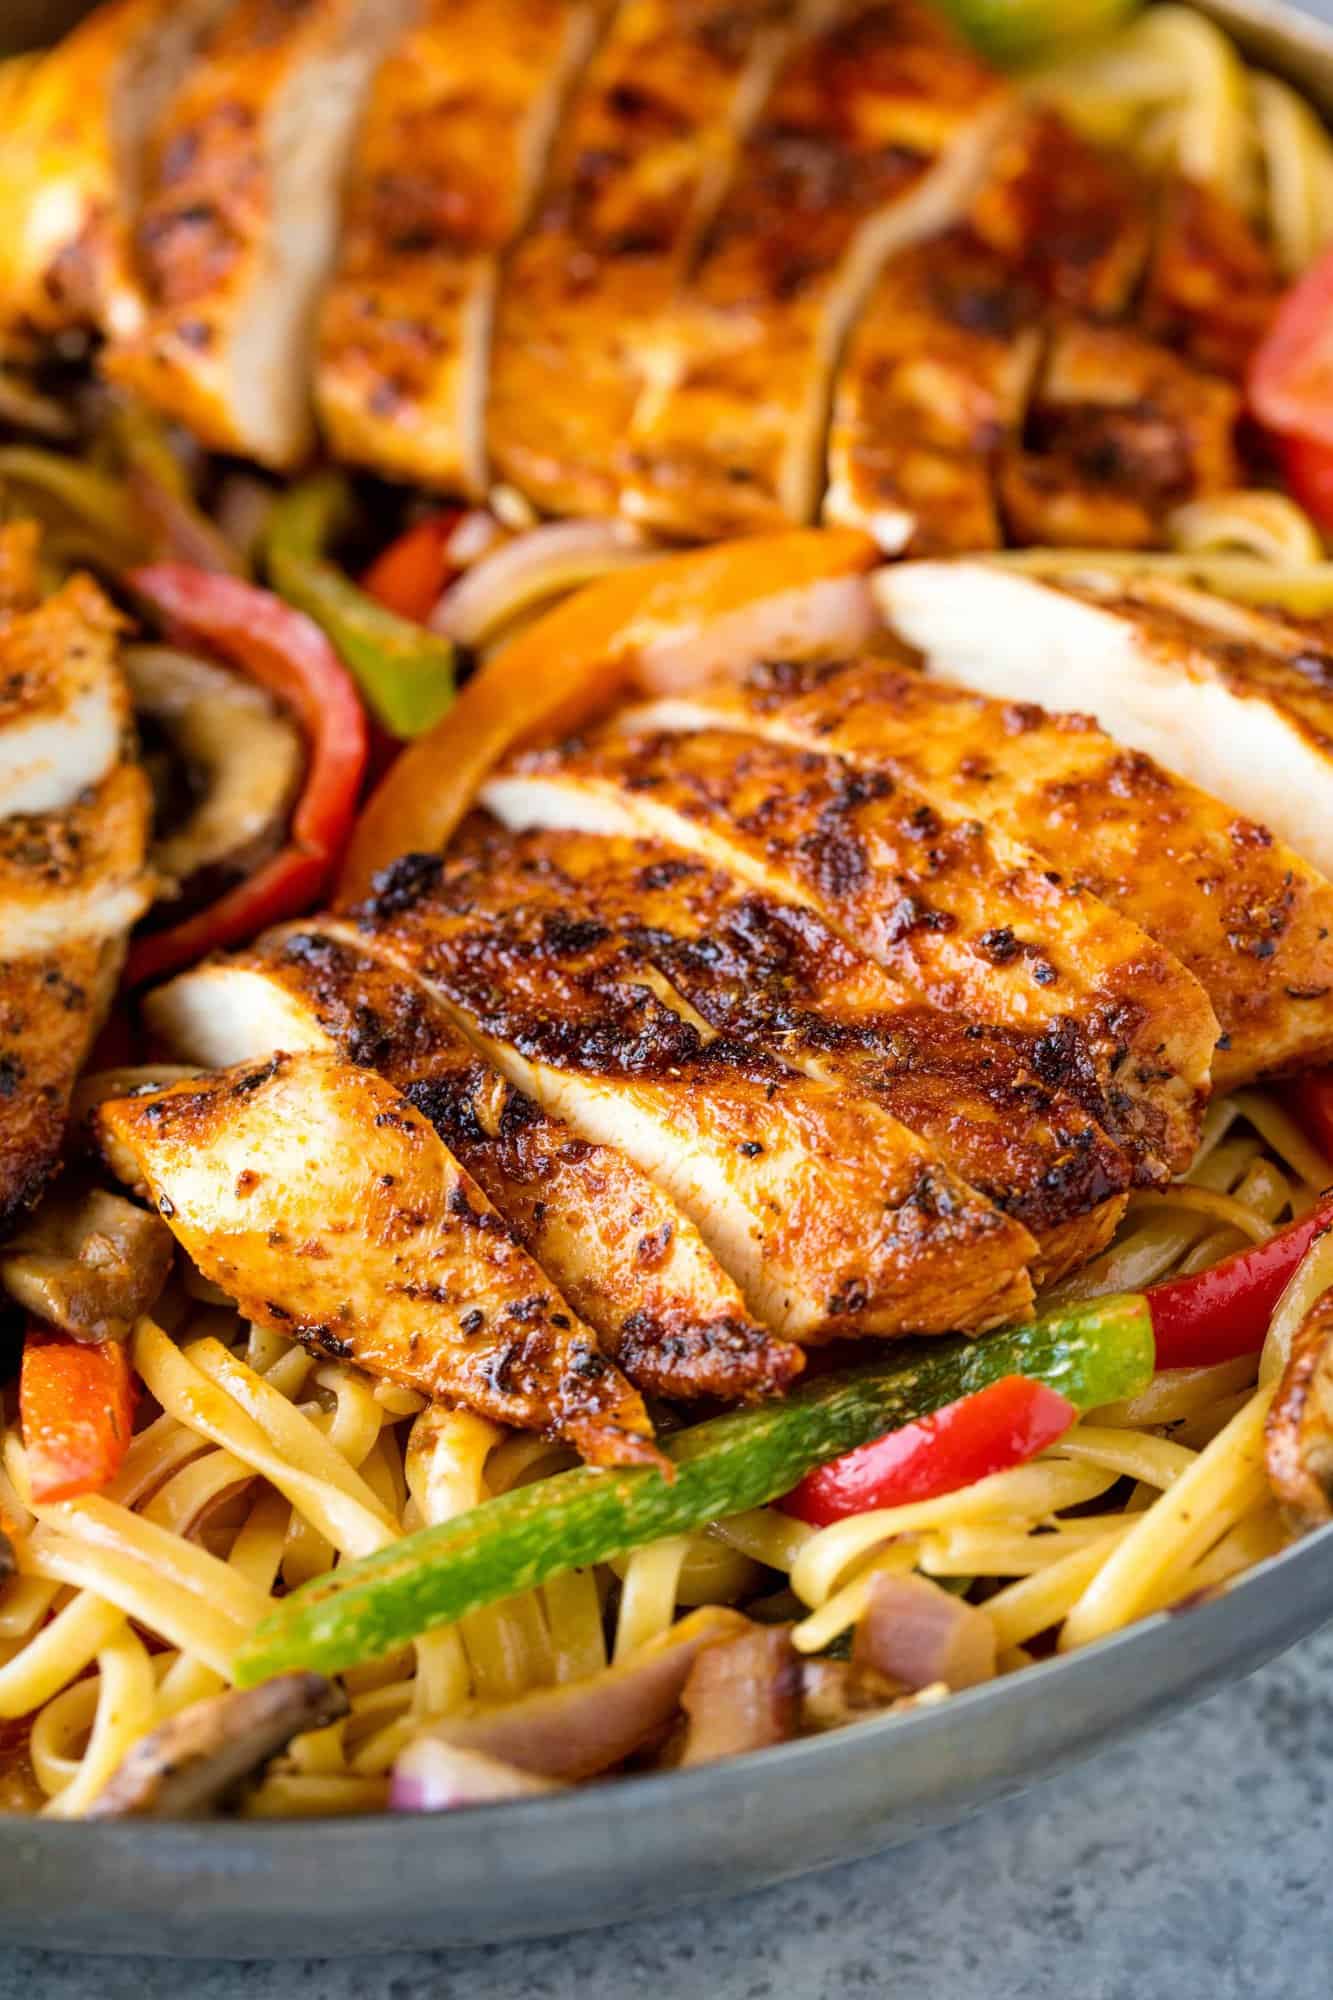 Creamy Cajun Chicken Pasta is the perfect family meal. Juicy cajun-spiced chicken is served over a bed of creamy pasta that's packed full of sautéed veggies.